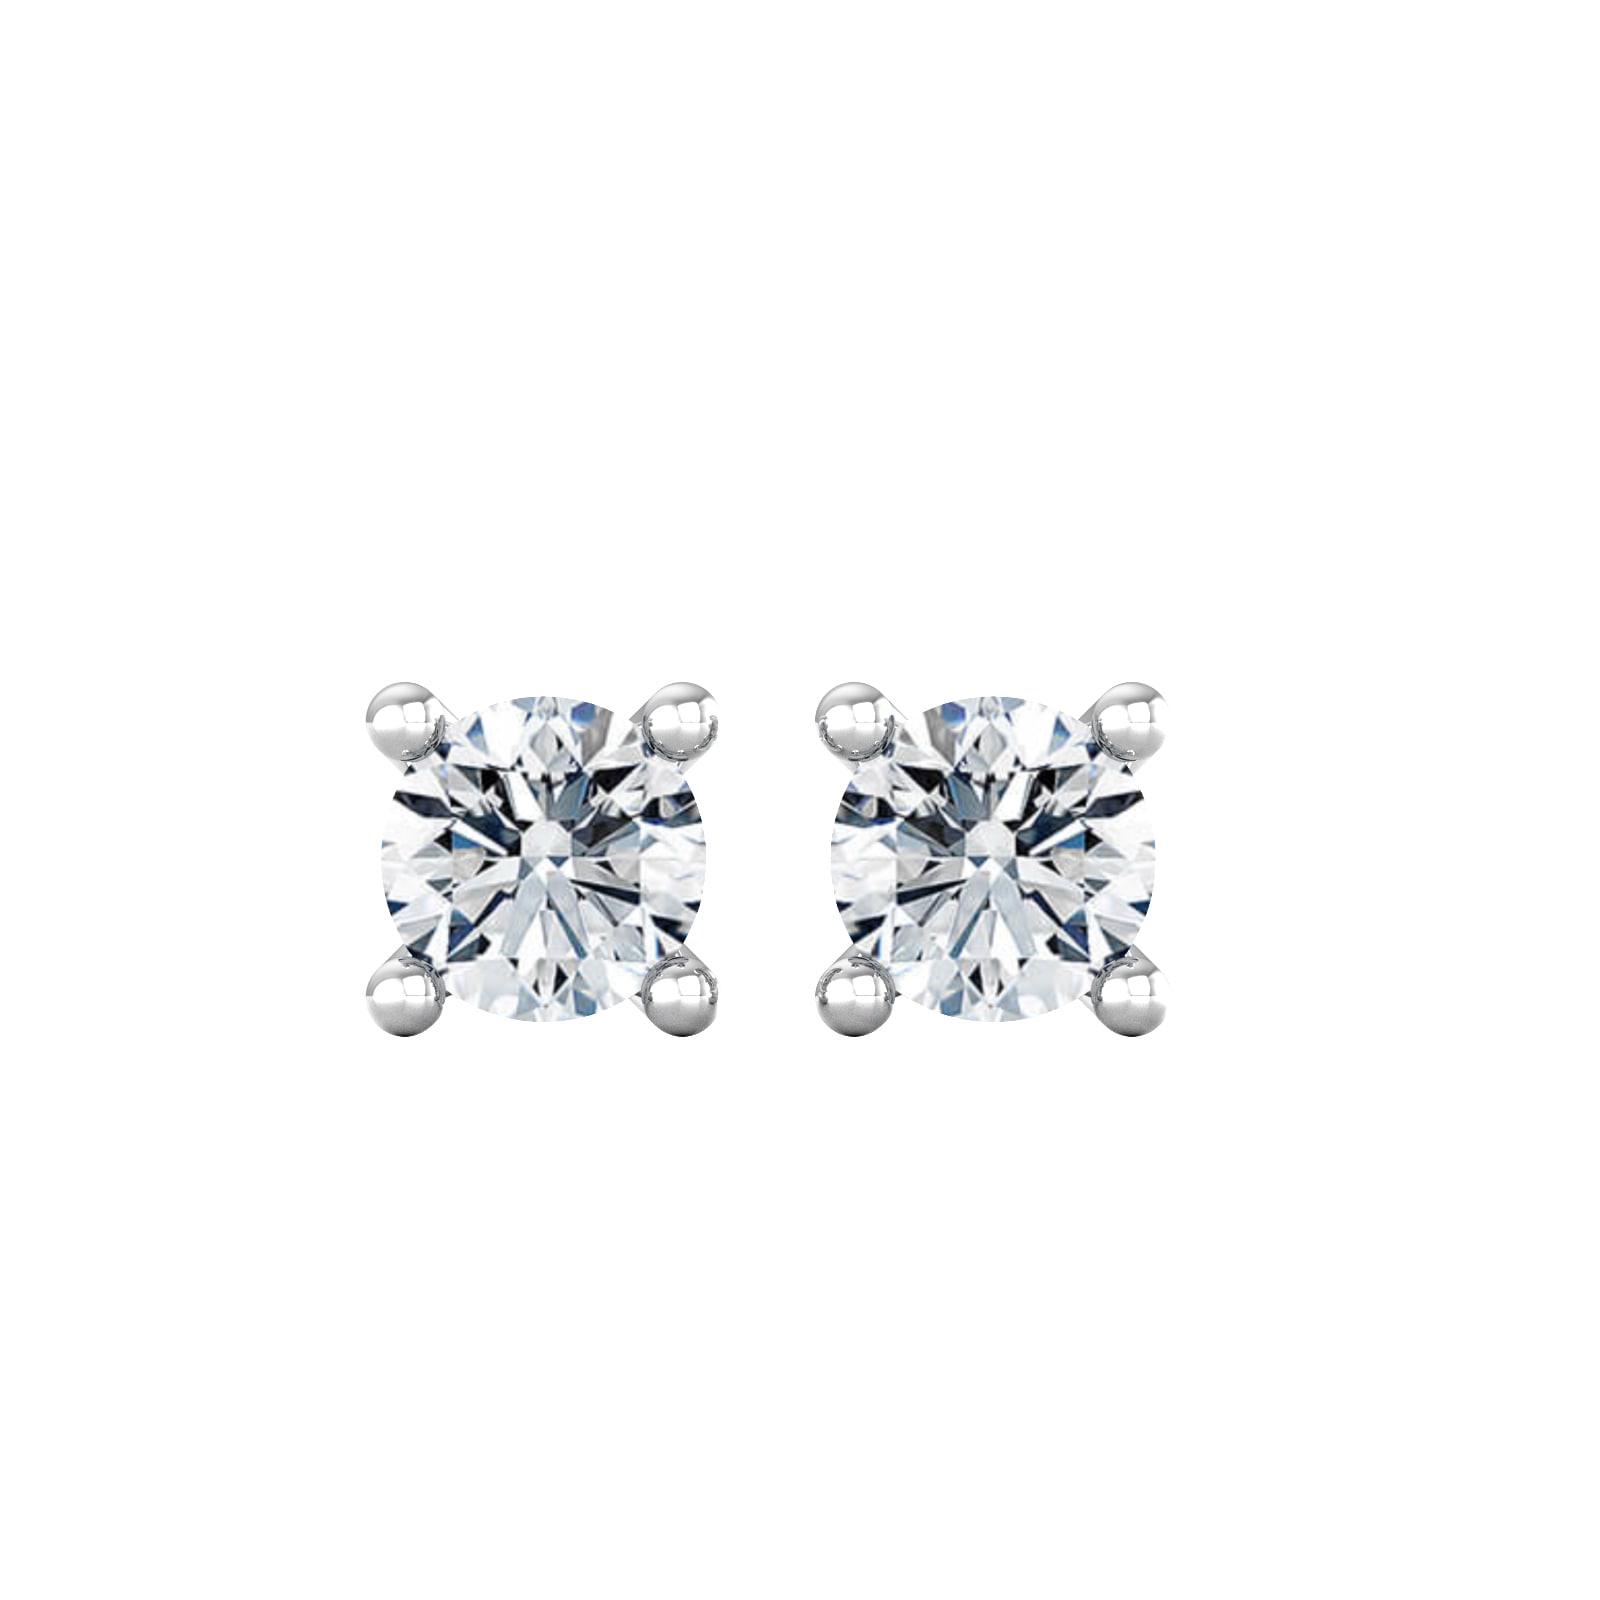 9ct White Gold 0.50cttw Solitaire Diamond Stud Earrings